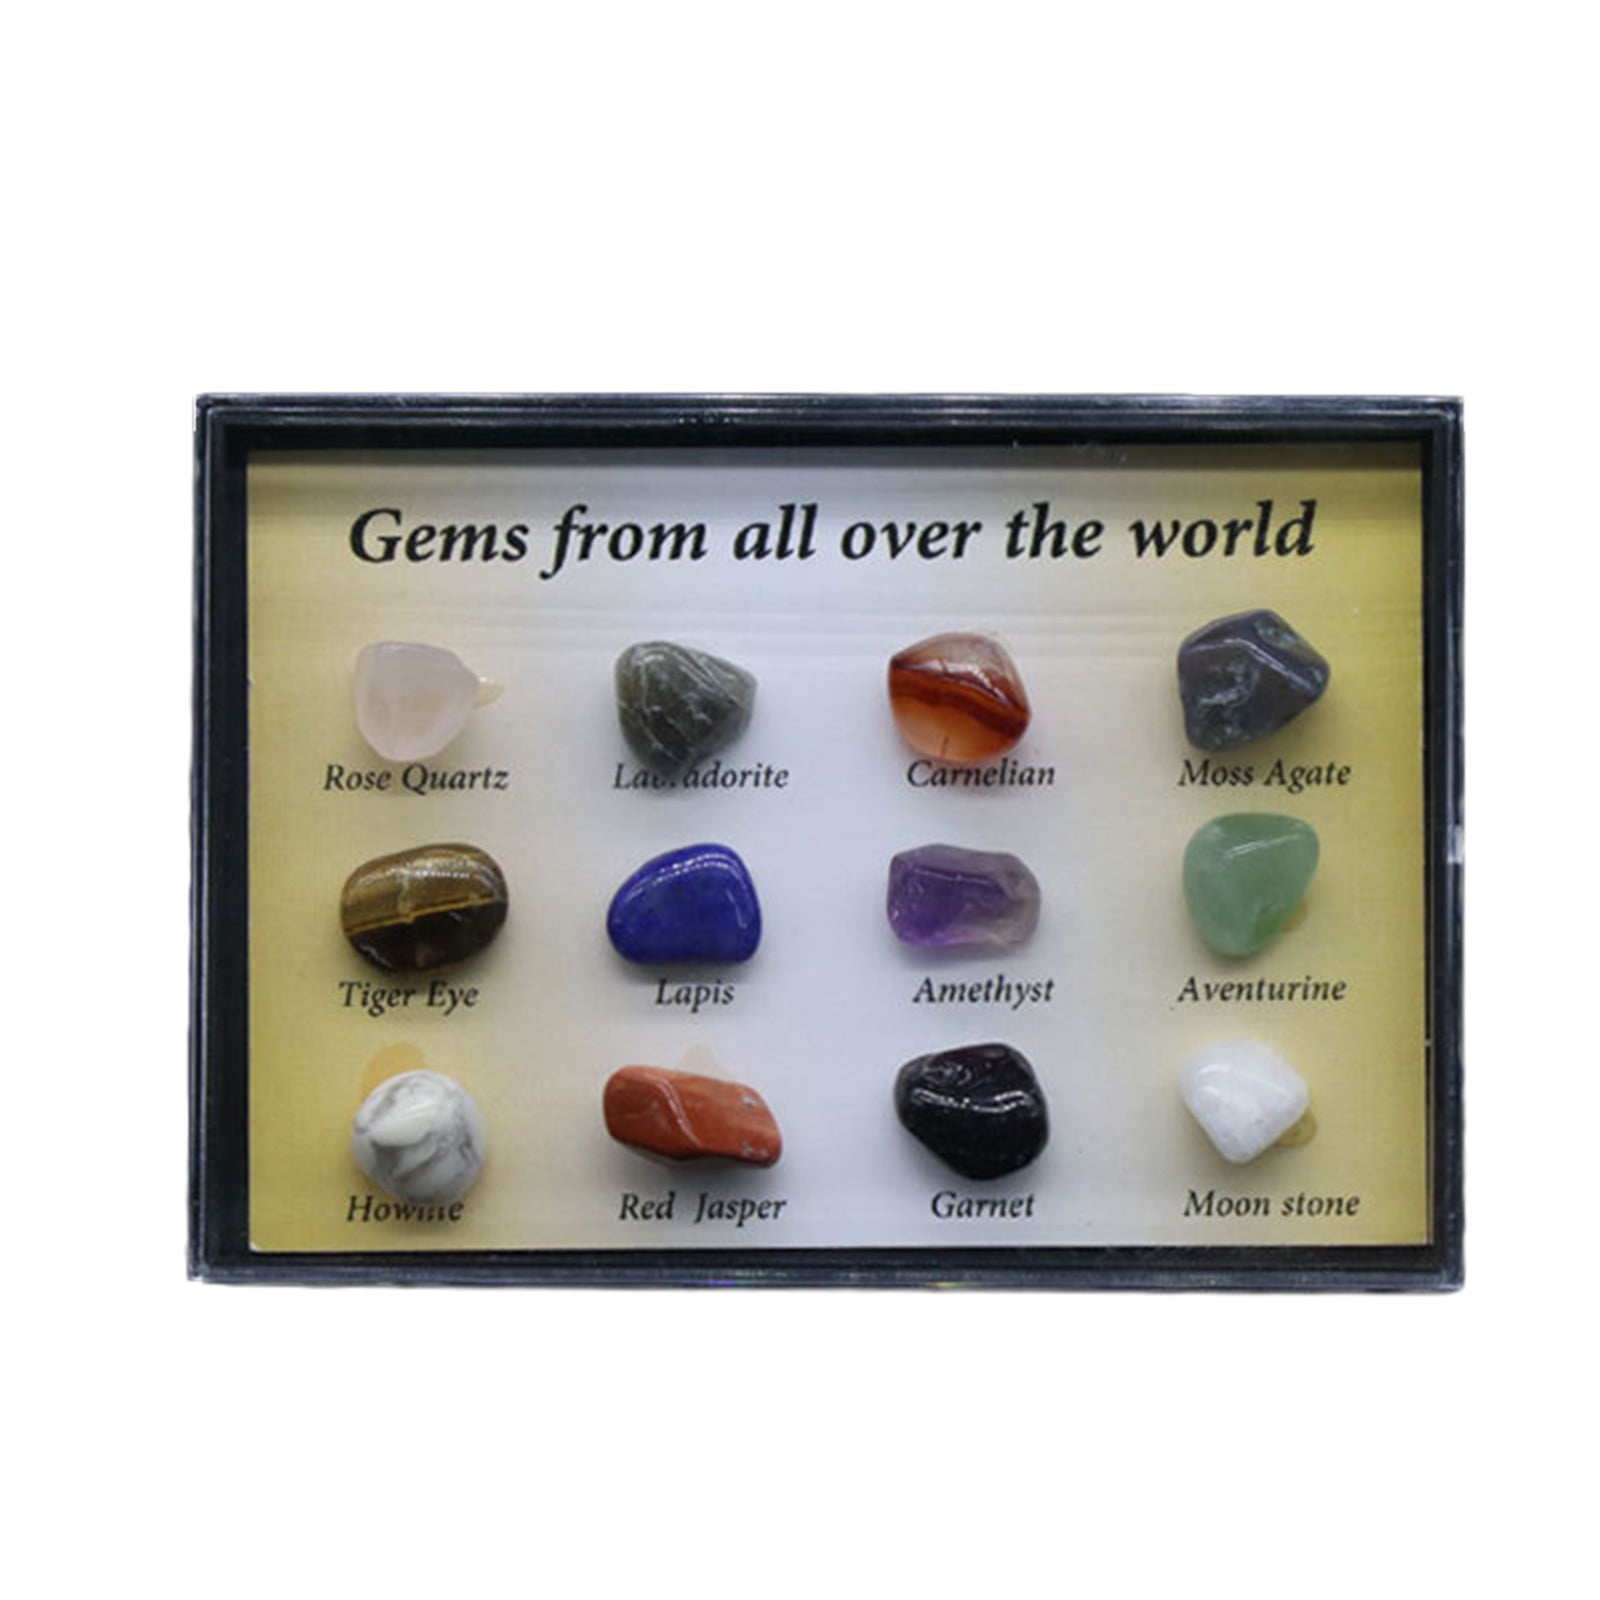 Geology Gem Kit for Kids with Display Case Limited Edition Brand Dancing Bear Rock and Mineral Educational Collection & Collection Box -18 Pieces with Description Sheet and Educational Information